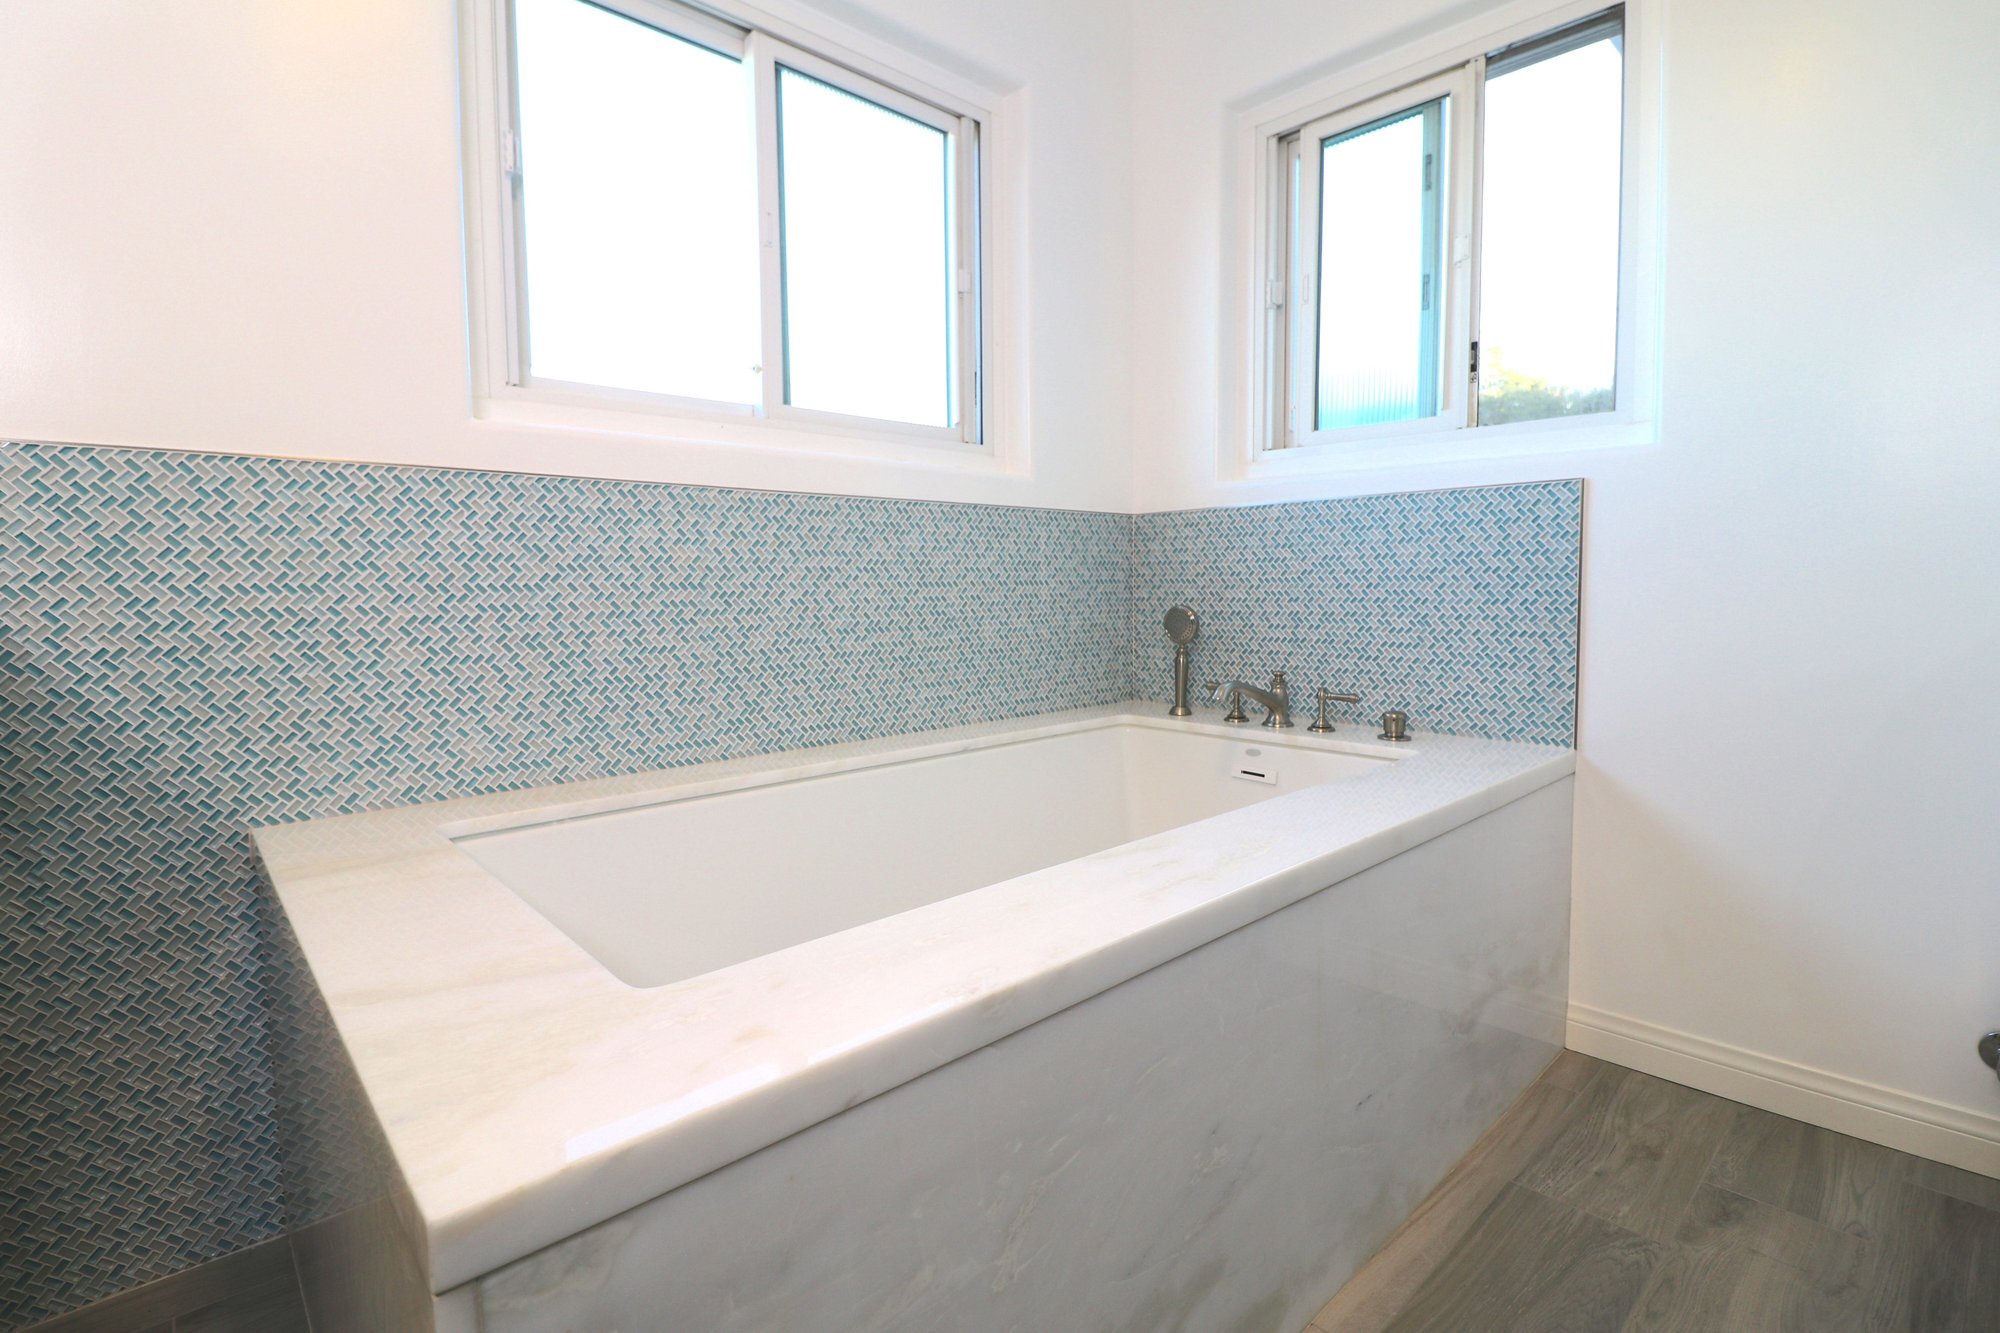 luxury whirlpool tub - Master bathroom remodel - best south bay - bay cities construction